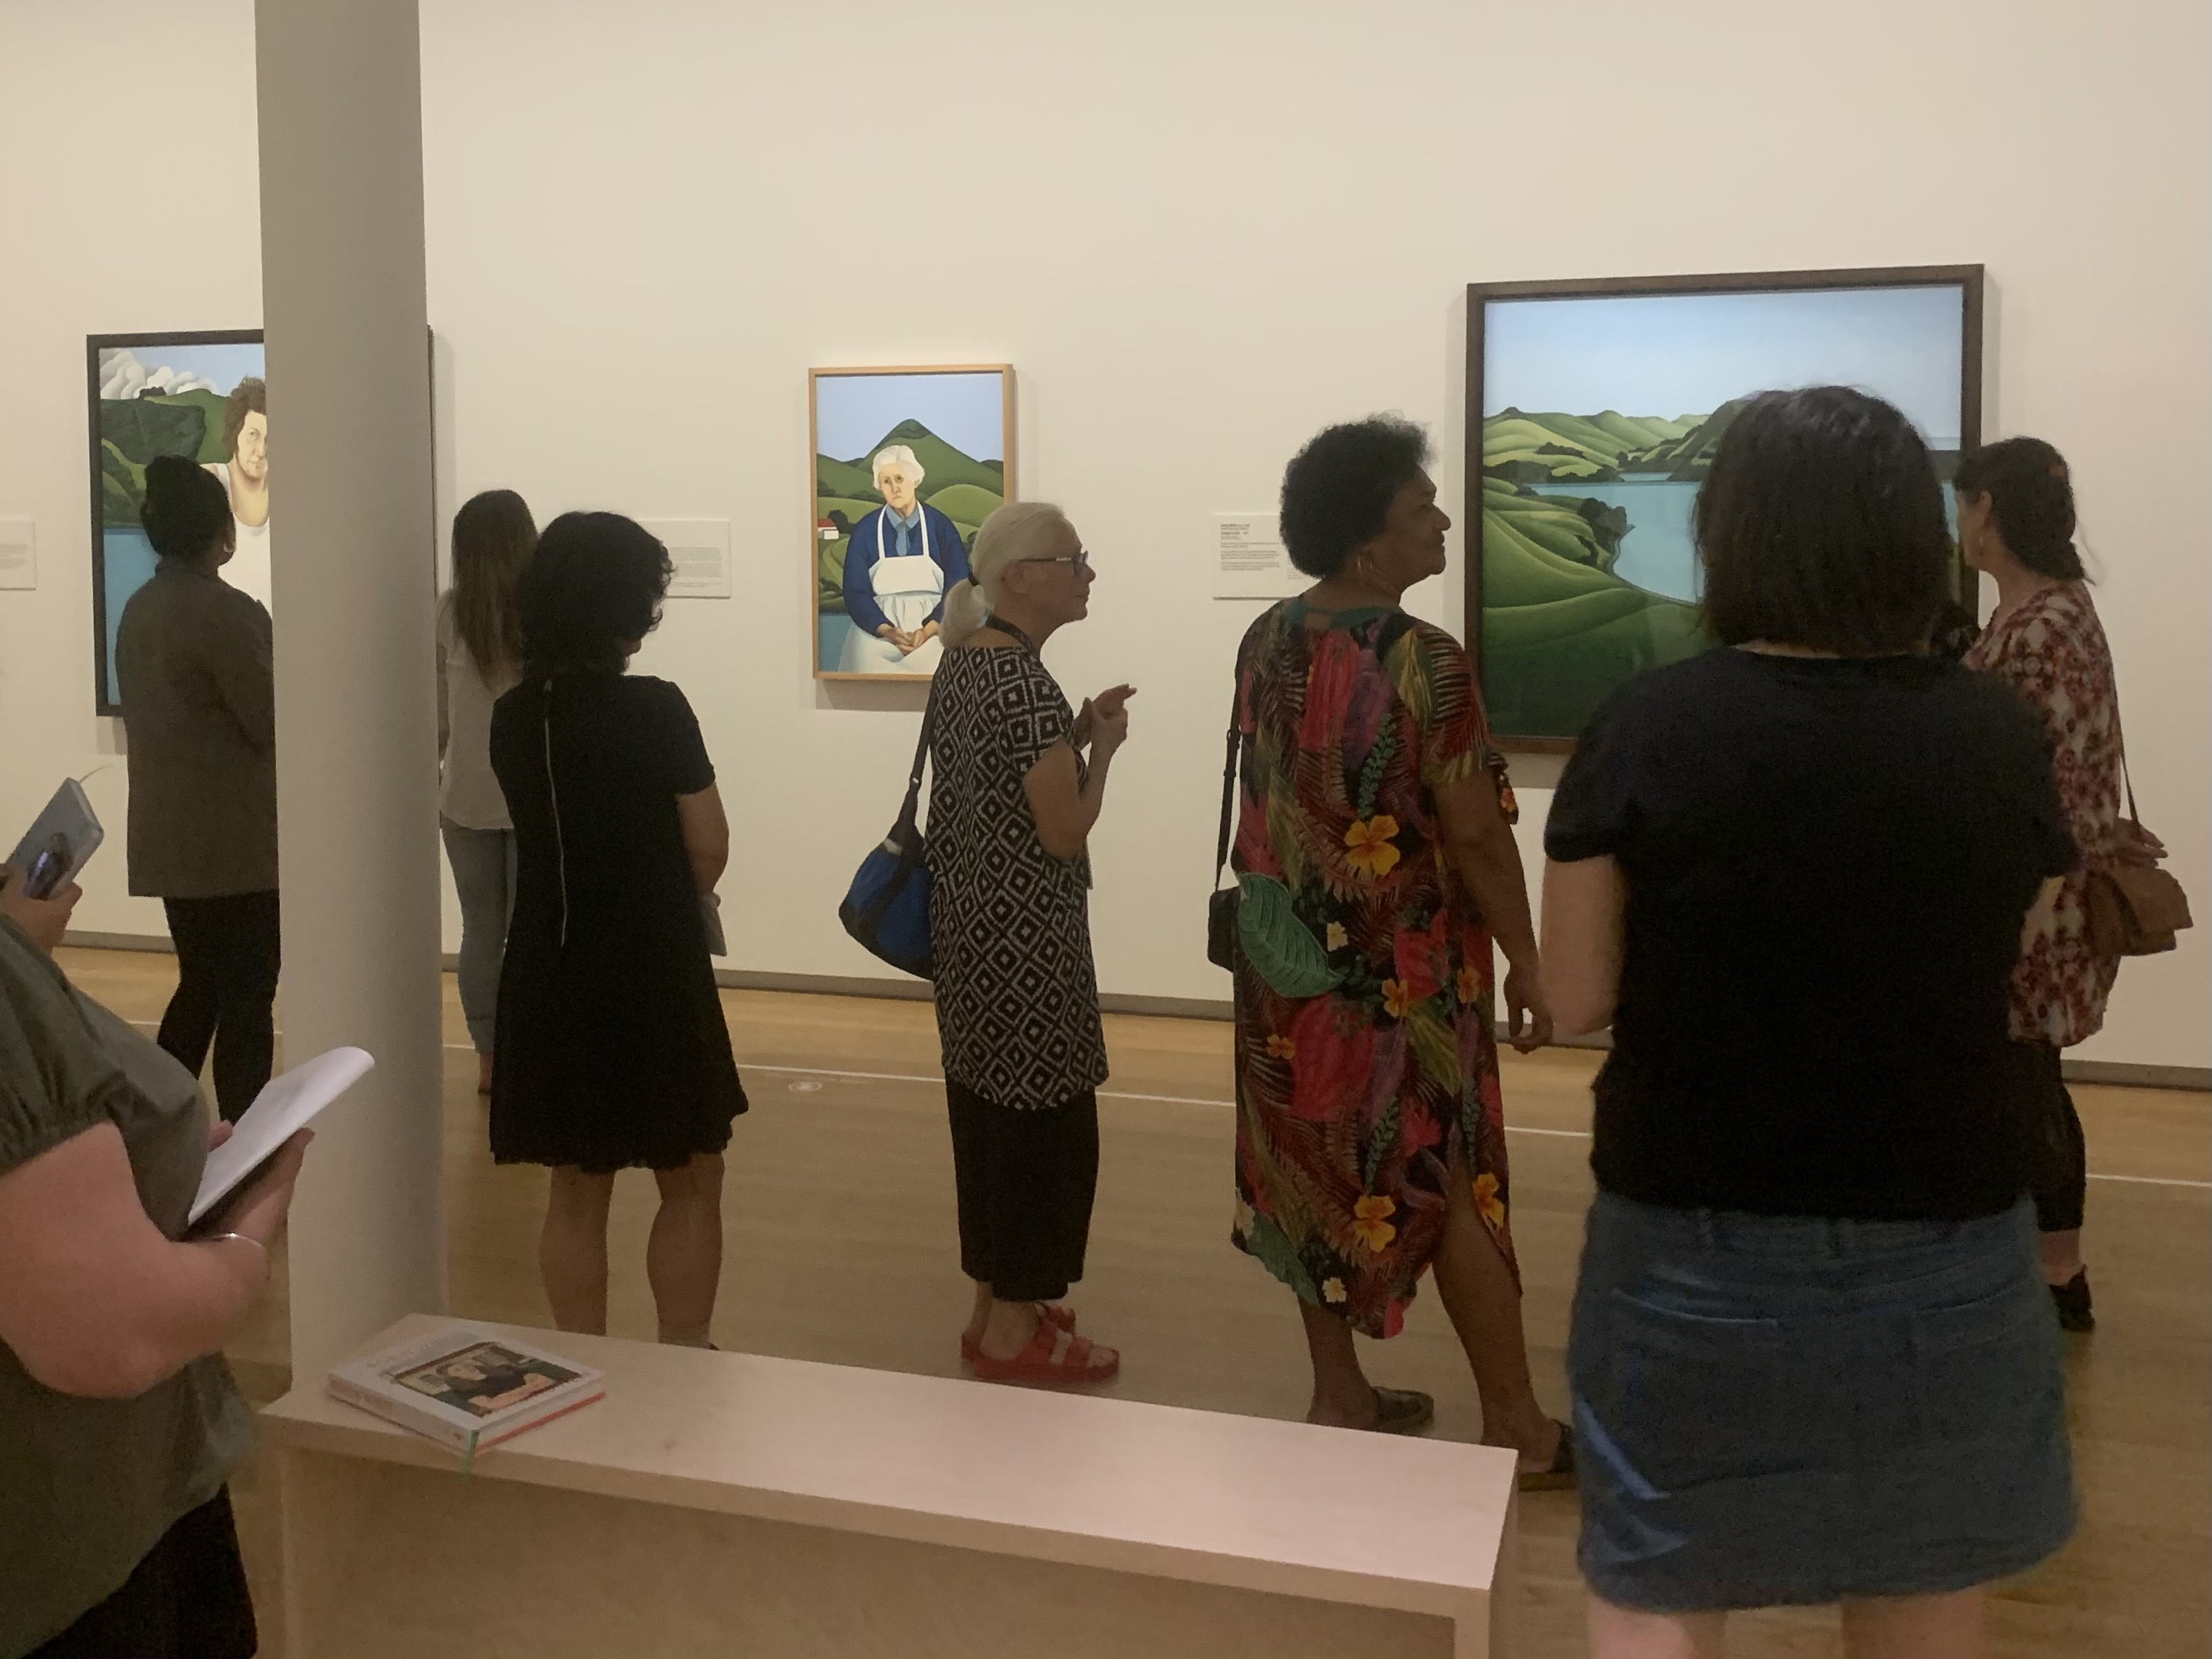 <p>Robin White and kaiako kōrero in&nbsp;<em>Robin White: Te Whanaketanga | Something is Happening Here</em>,&nbsp;Auckland Art Gallery Toi o Tāmaki, November 2022. Details of artworks included (left to right): Robin White, <em>Sam Hunt, Bottle Creek</em>, 1973, oil on canvas, The University of Auckland Art Collection;&nbsp;<em>Florence and Harbour Cone</em>, 1974, oil on canvas, Christchurch Art Gallery Te Puna o Waiwhetū, purchased 1975 with assistance from the Queen Elizabeth II Arts Council;&nbsp;<em>Hooper&#39;s Inlet</em>, 1976, oil on canvas on board, The Fletcher Trust Collection. Image: Kendra Stoner.&nbsp;</p>
